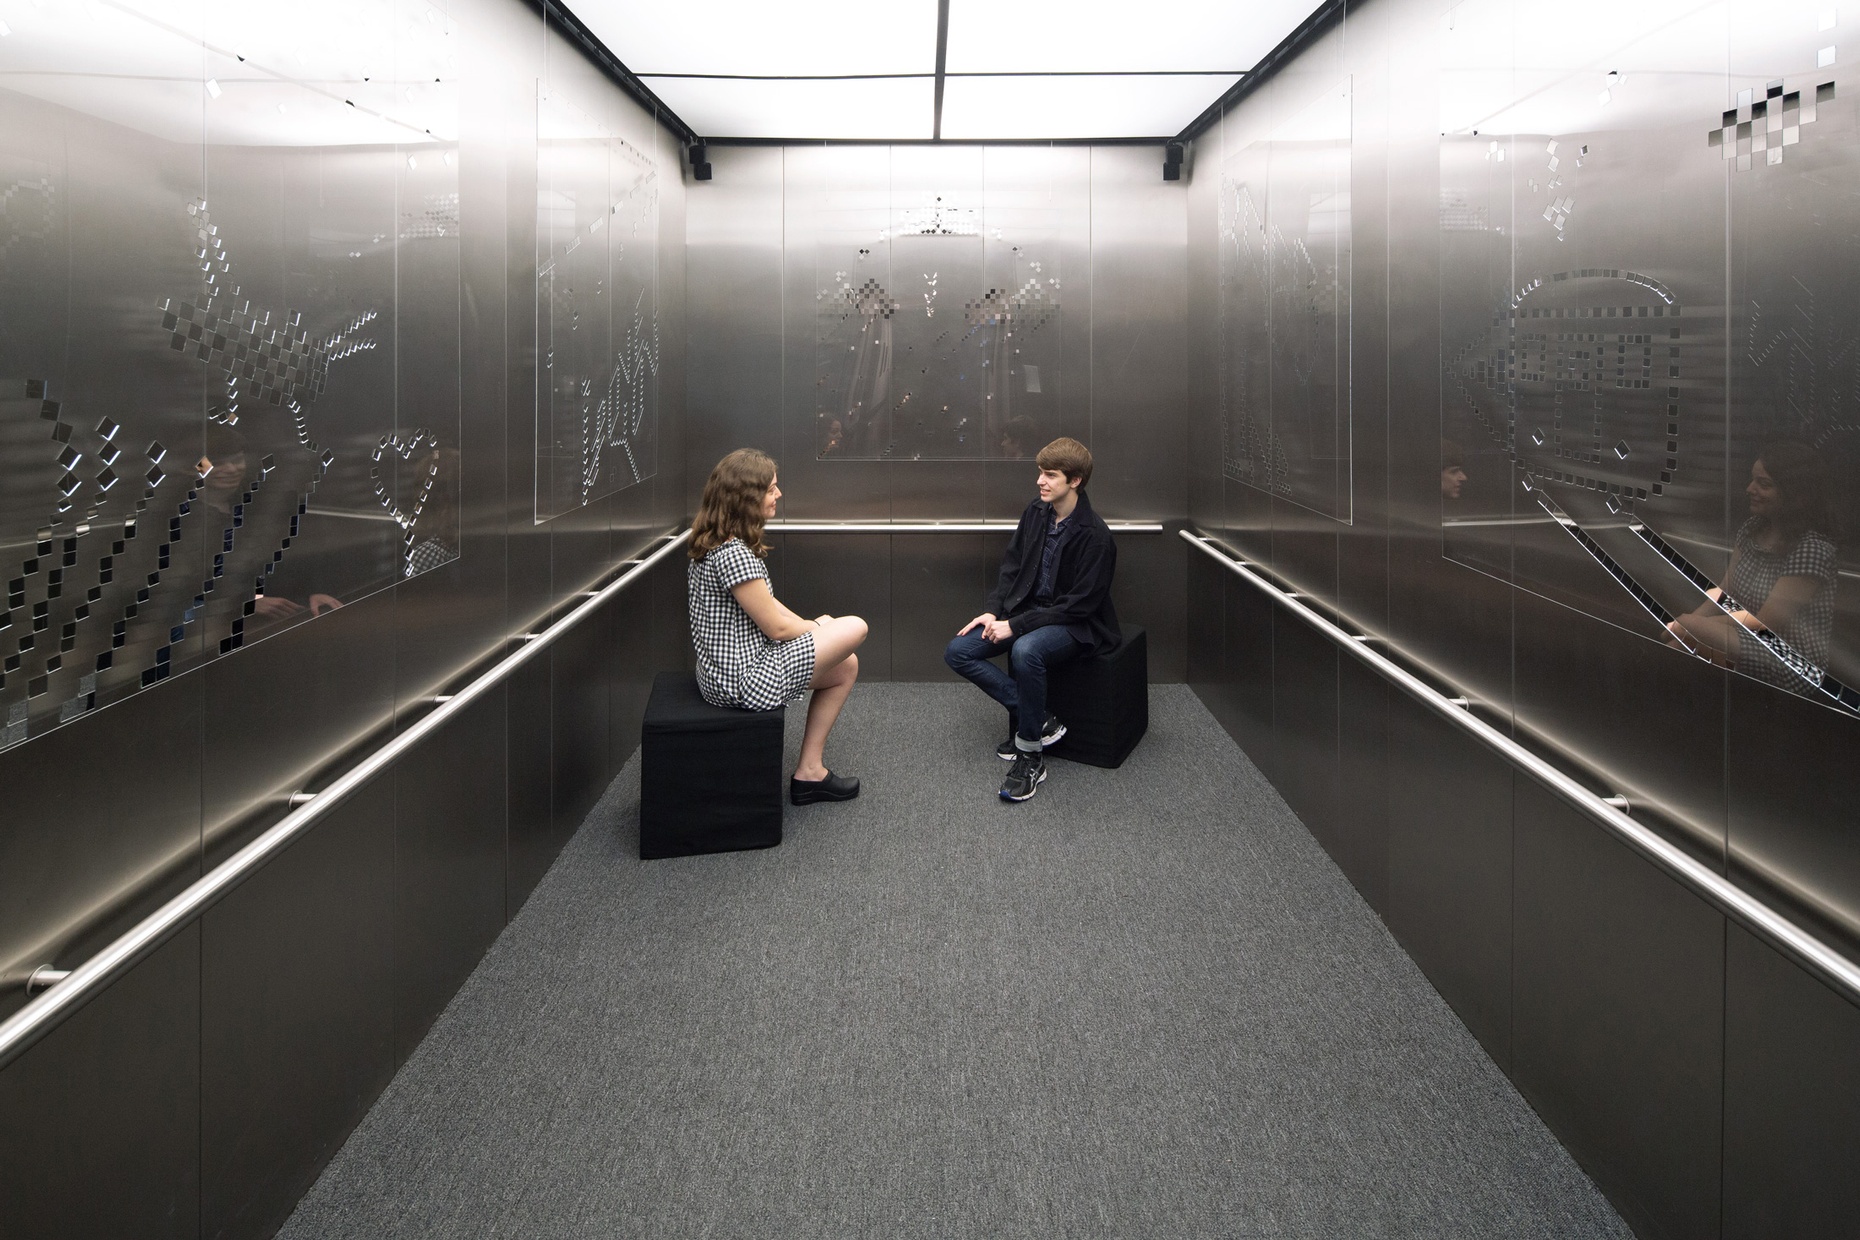 Two people sit on stools in an elevator space with art made of plexiglass and mirrors hanging on the walls.